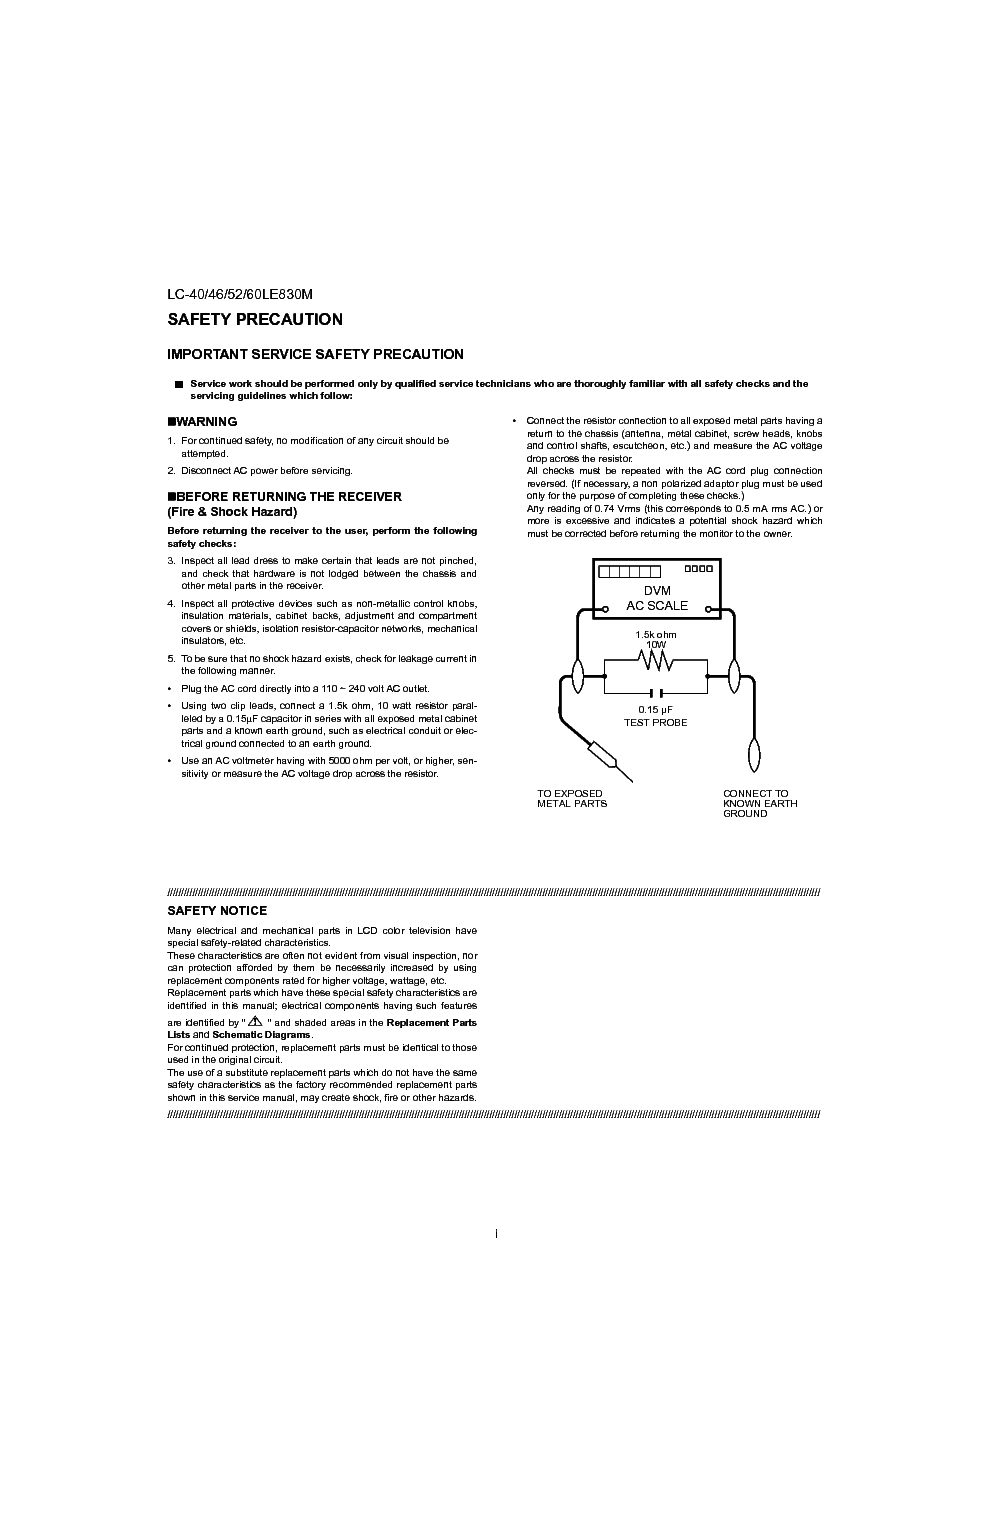 SHARP LC-40-60LE830M-SM service manual (2nd page)